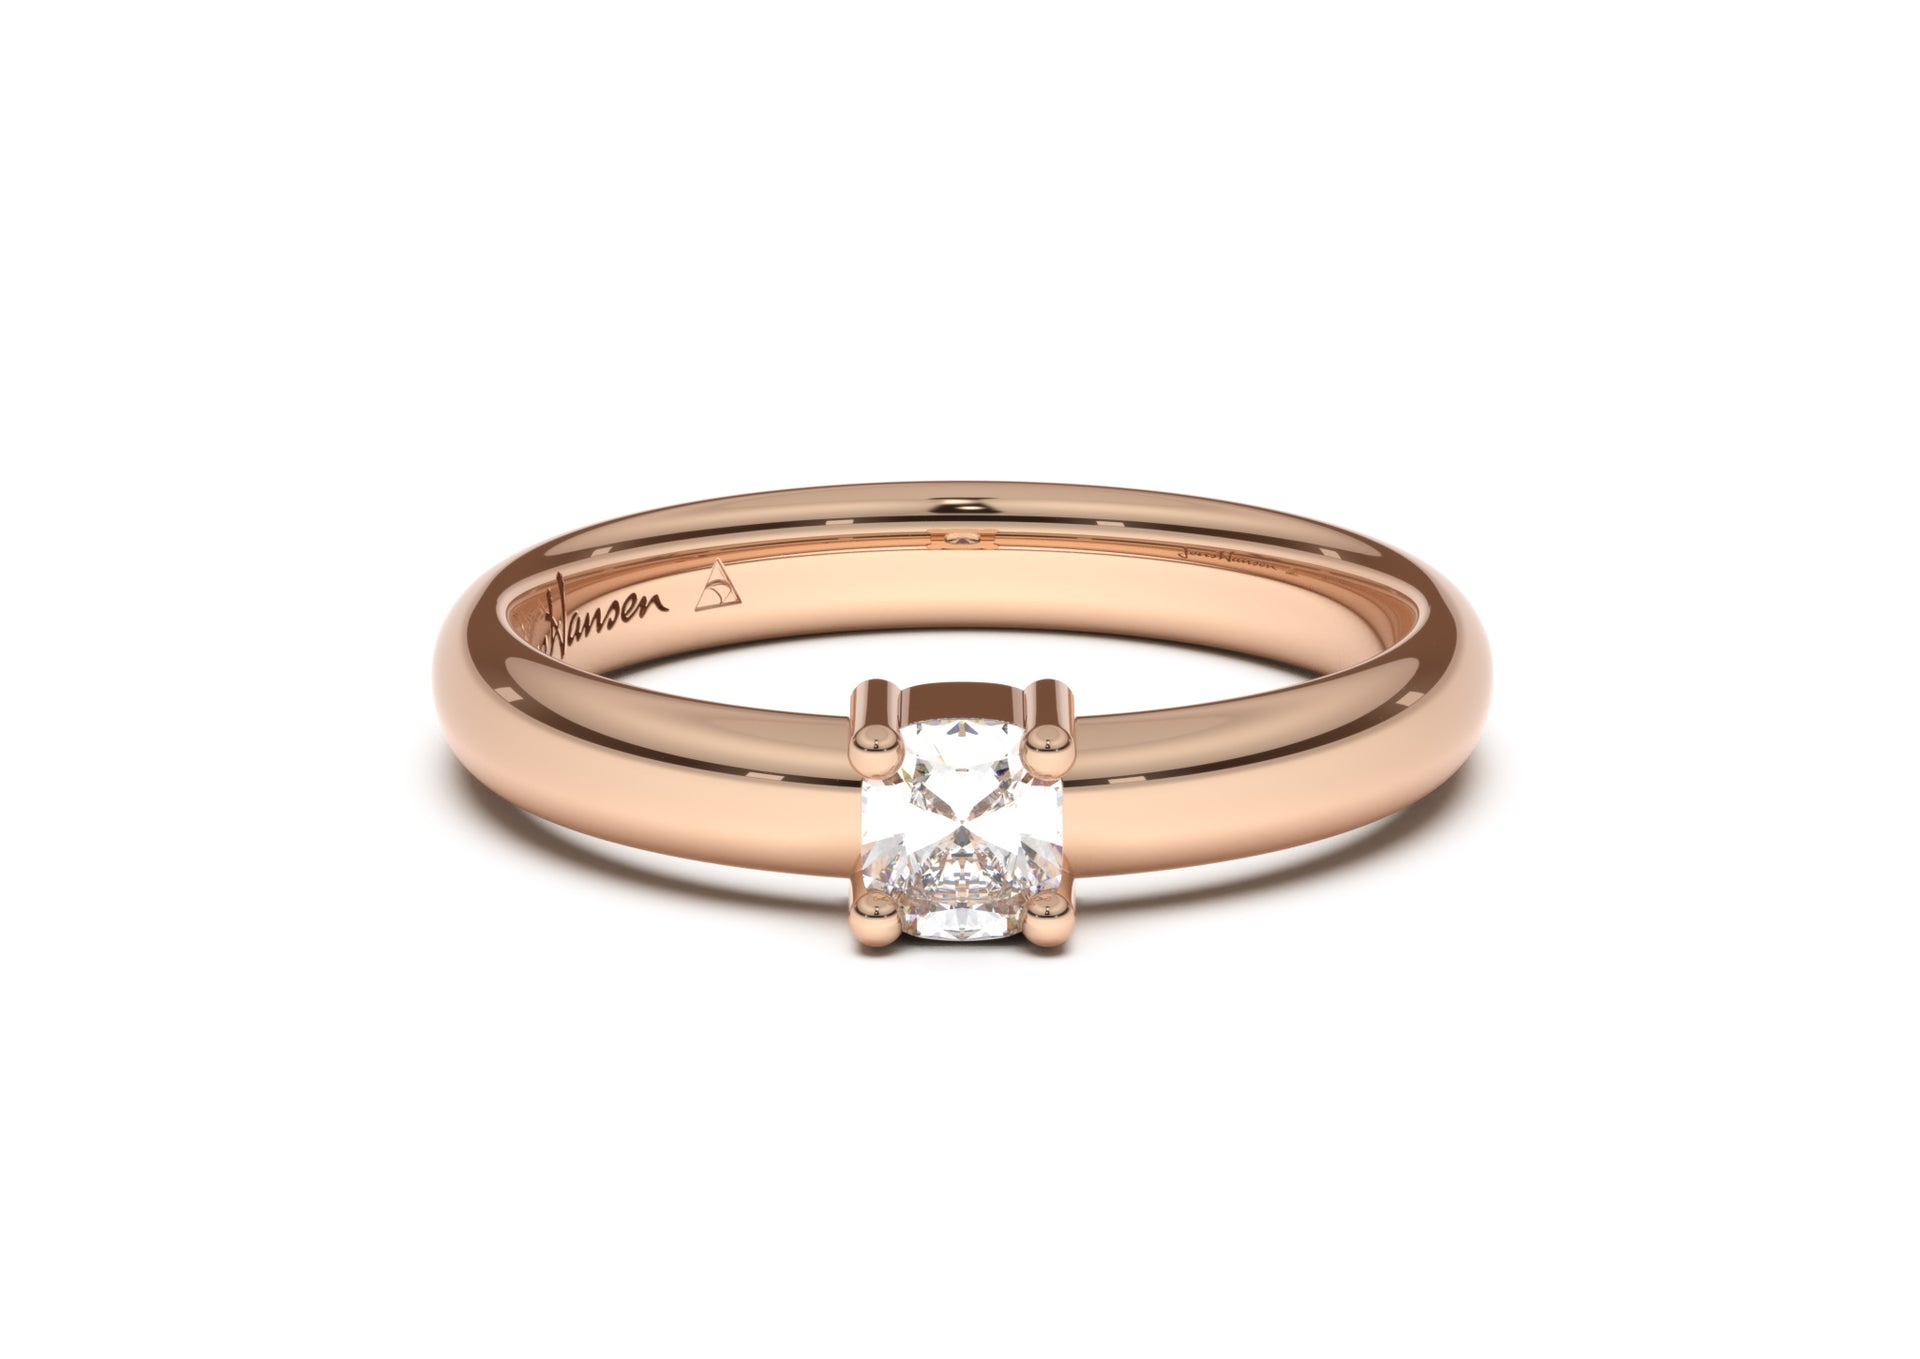 Cushion Classic Slim Engagement Ring, Red Gold